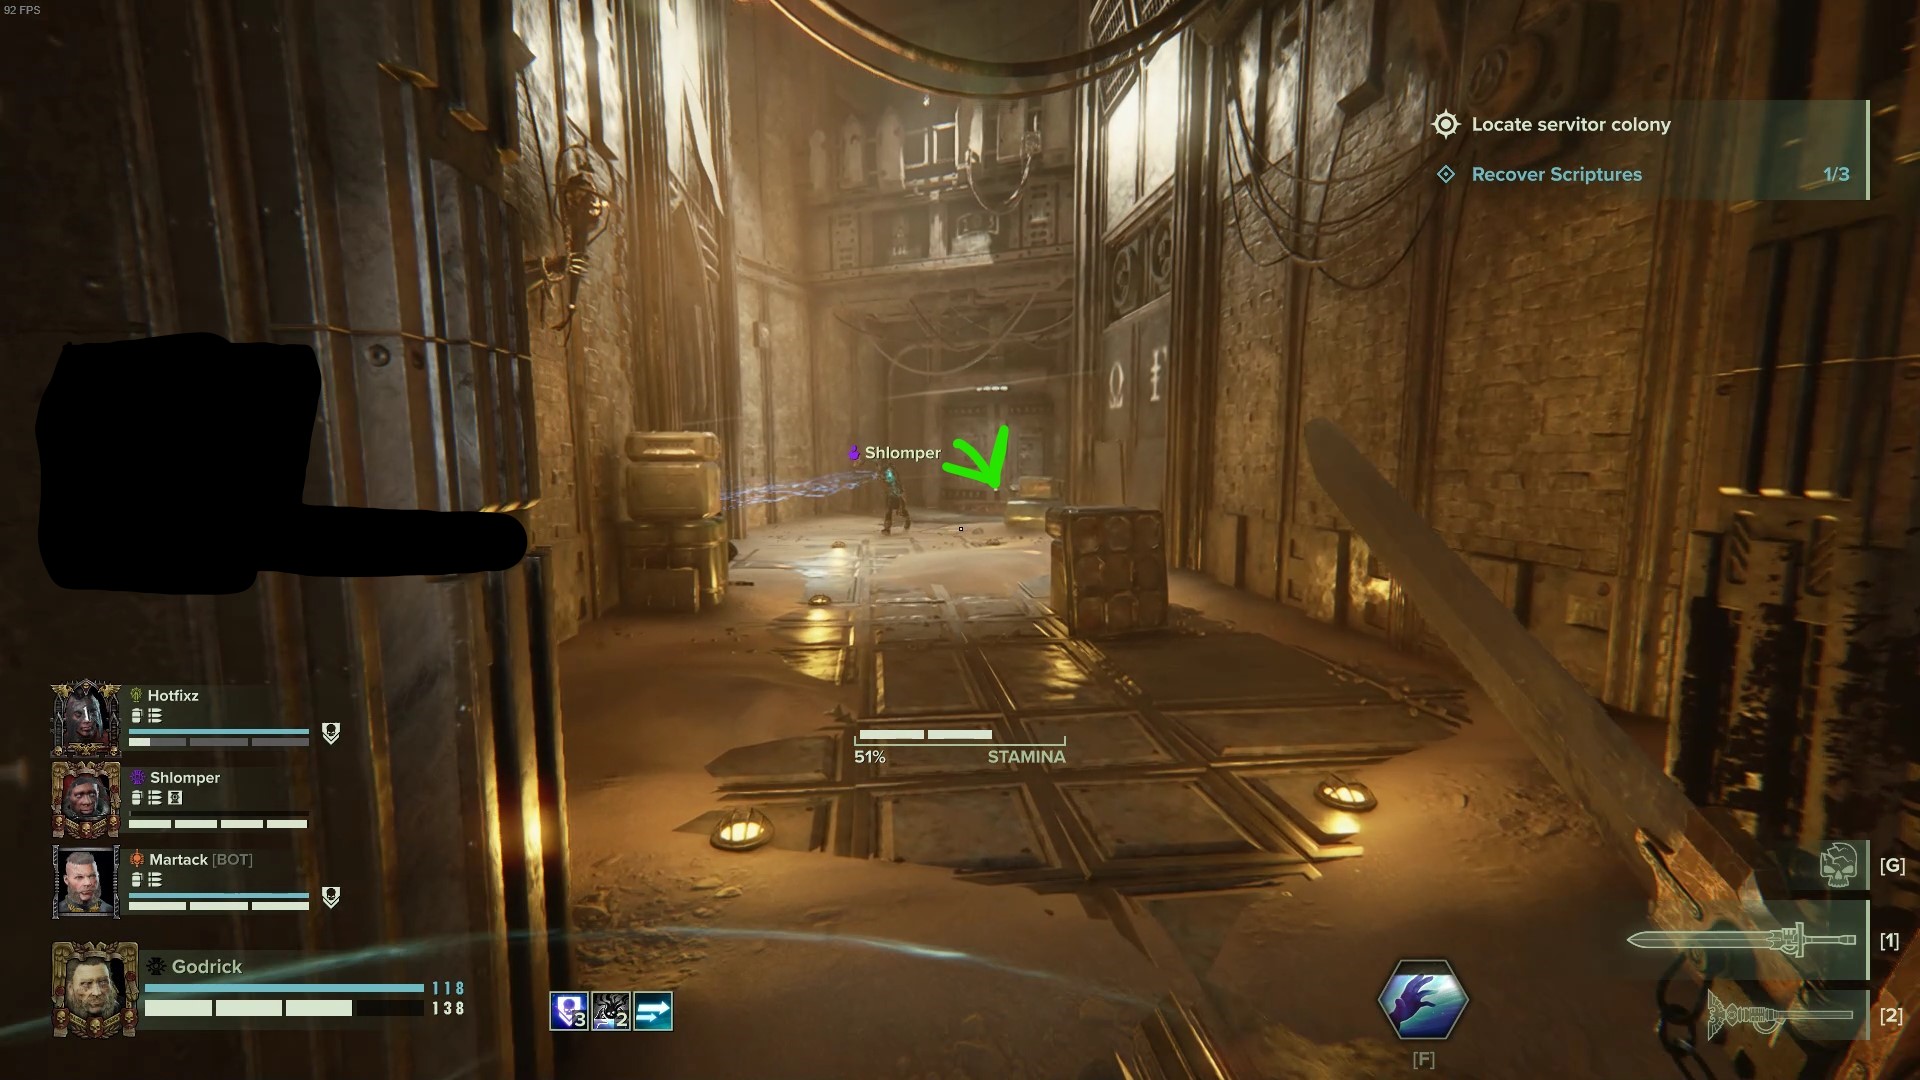 The first one is down this corridor in the very first area of the map you can enter combat with.